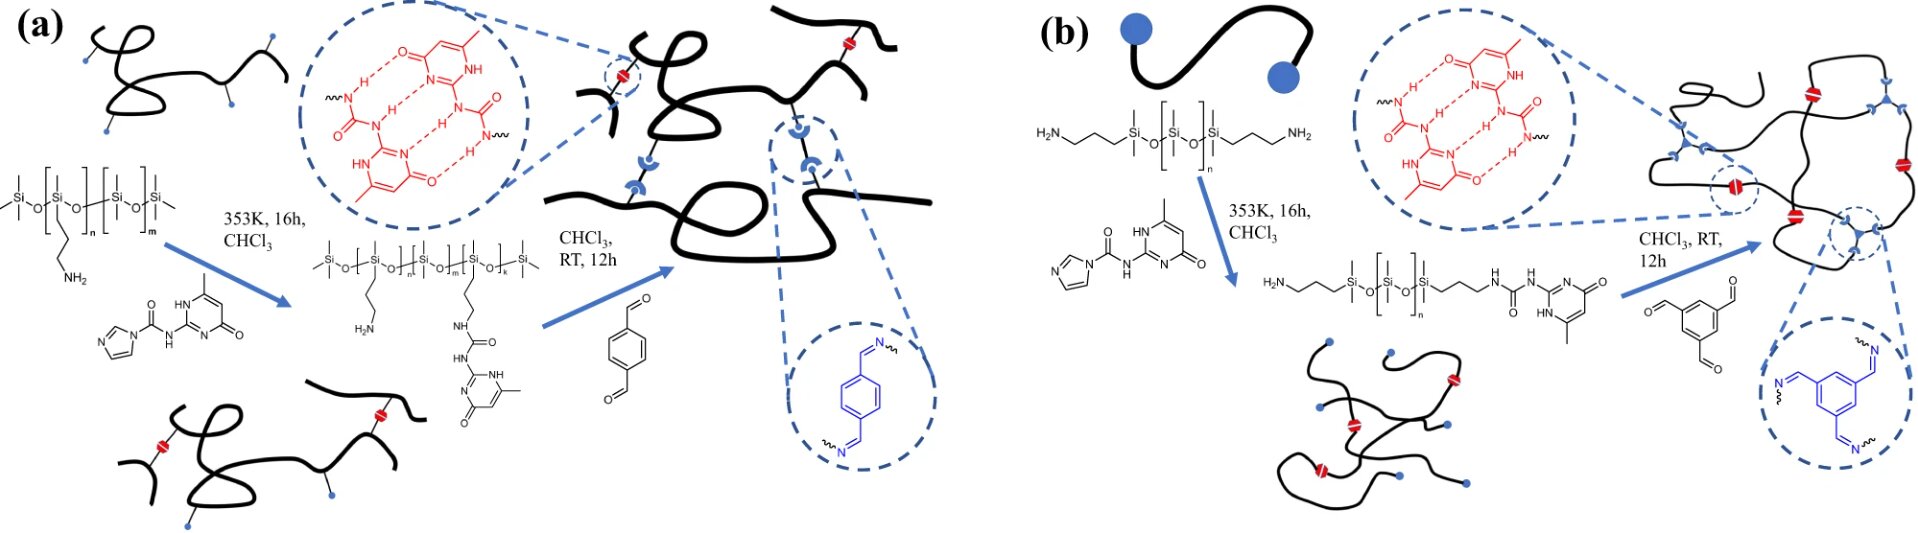 Molecularly designing polymer networks to control sound damping